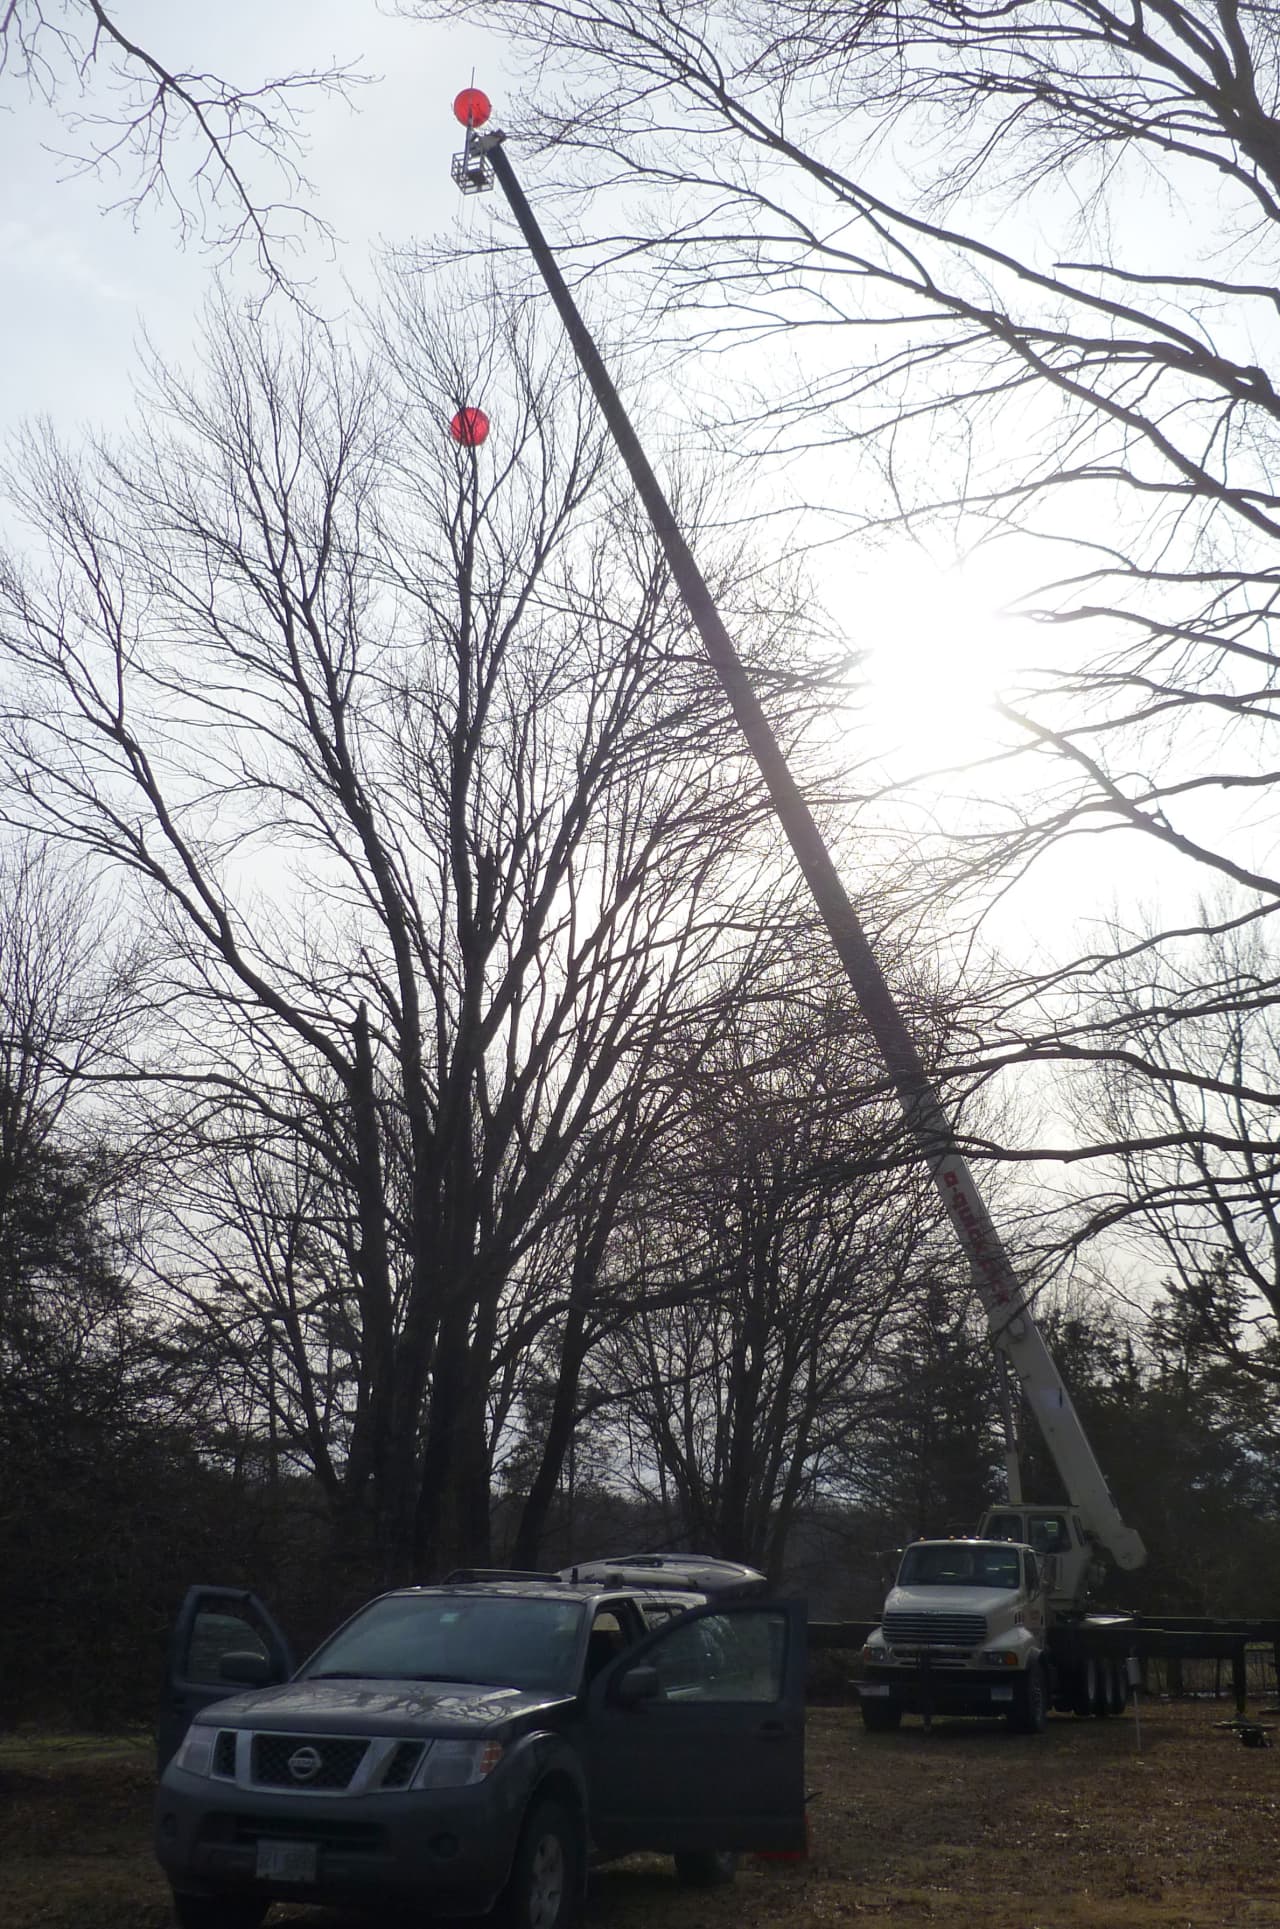 In January Verizon Wireless set up a pair of red balloons in New Canaan to test a potential cell phone tower location. 